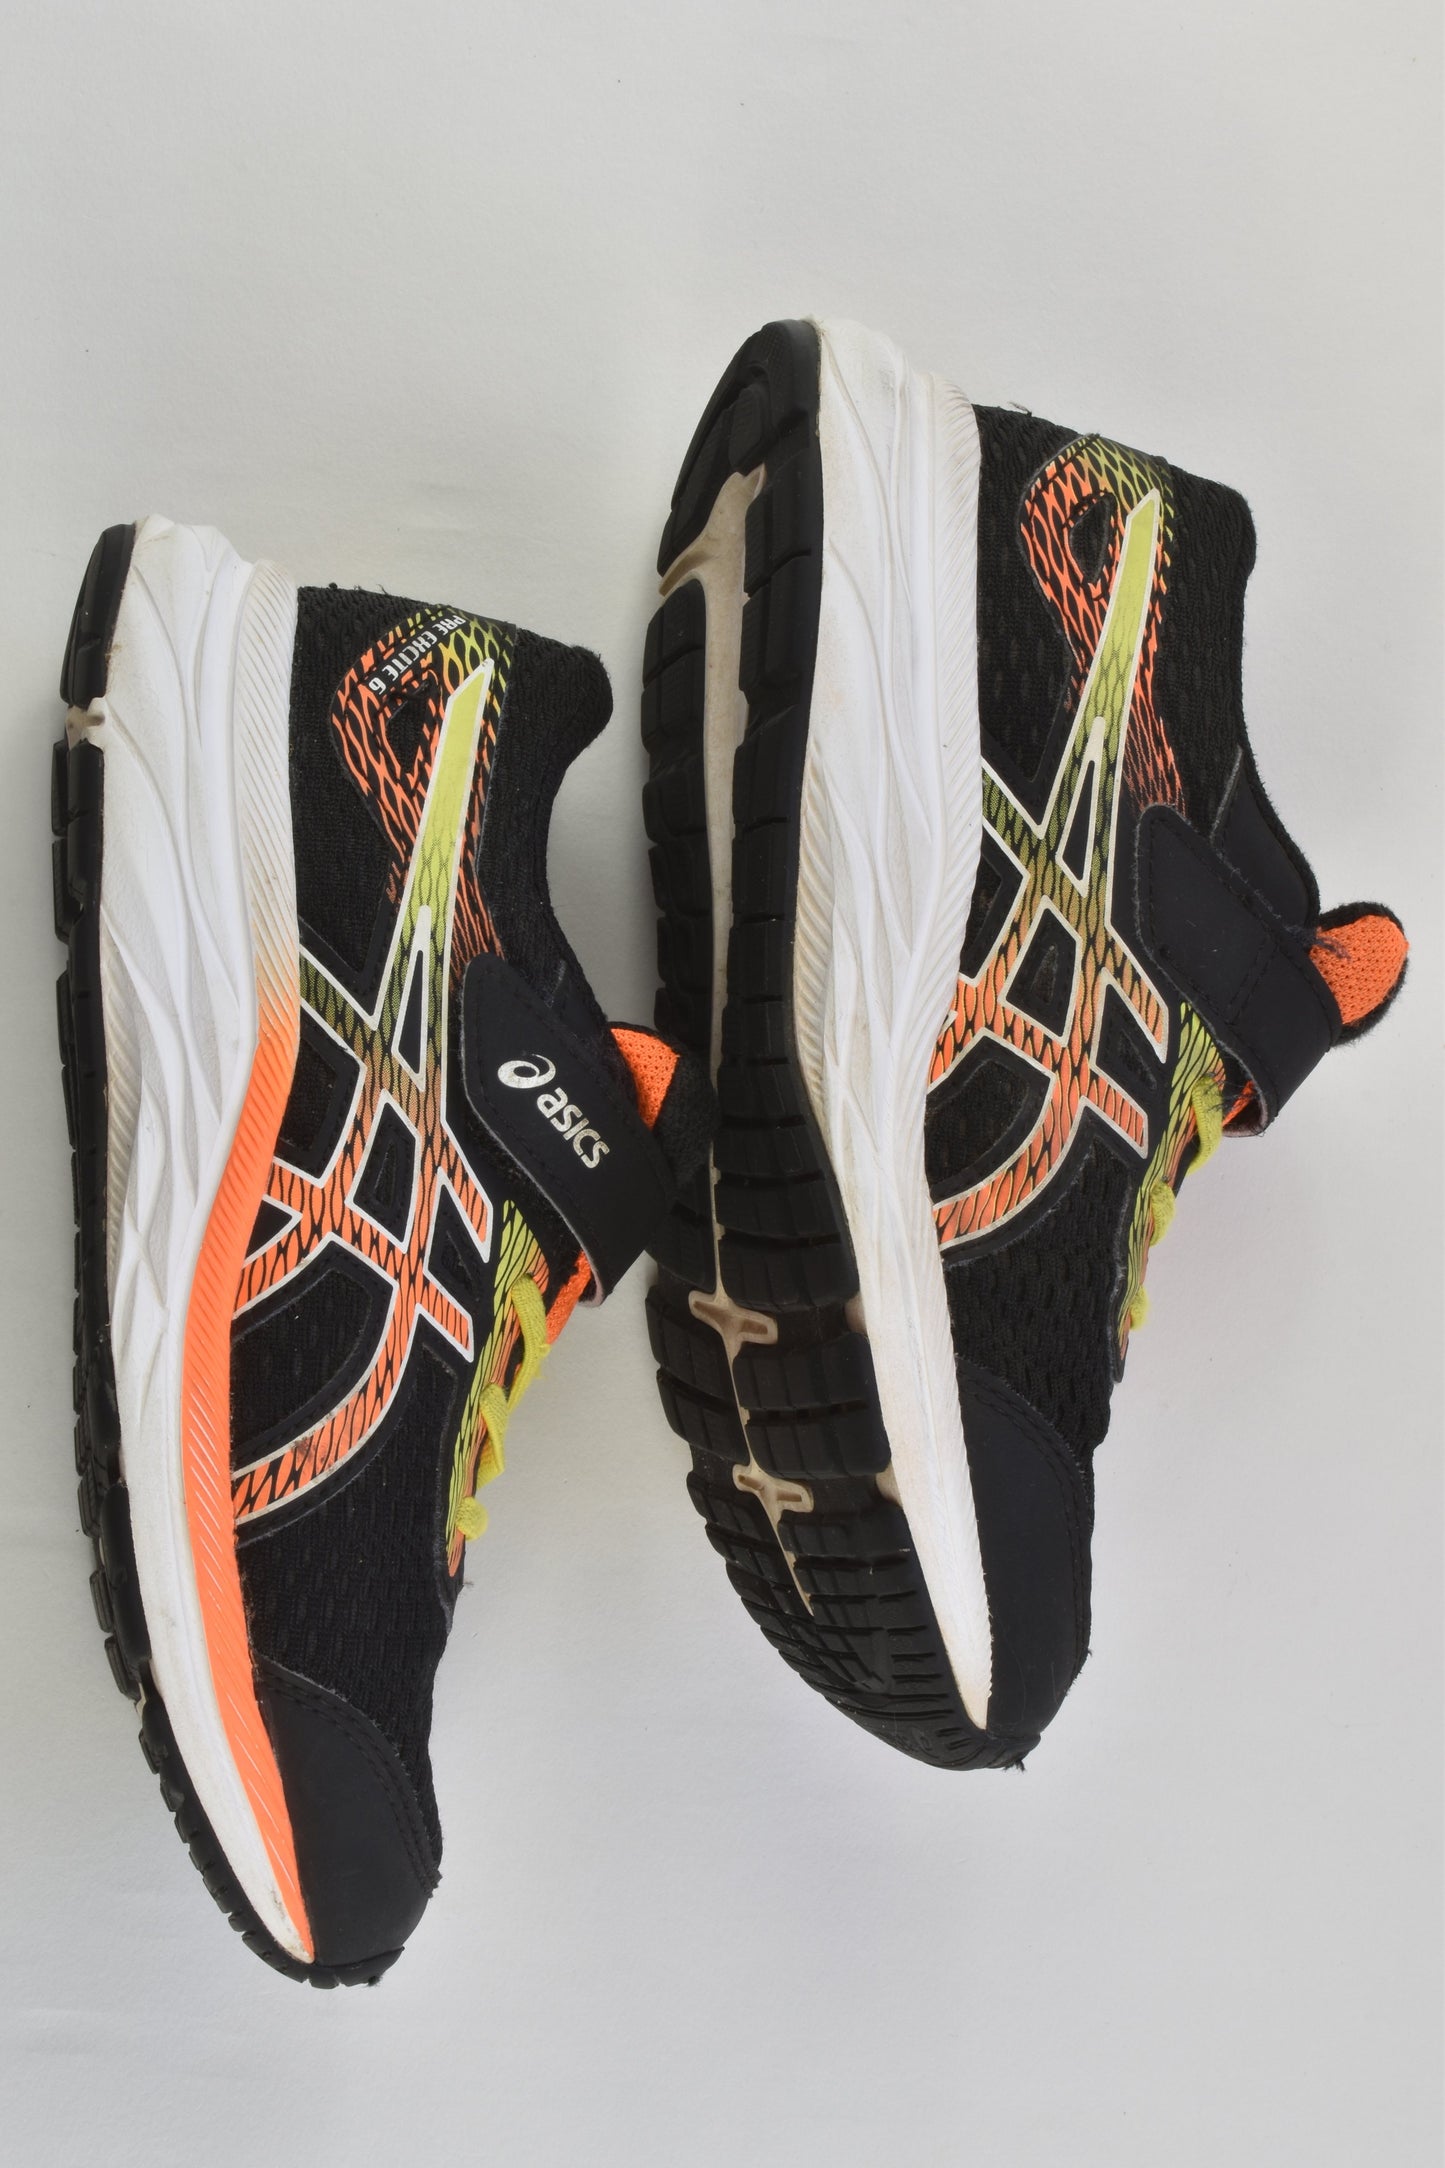 Asics Size US 1 Sneakers